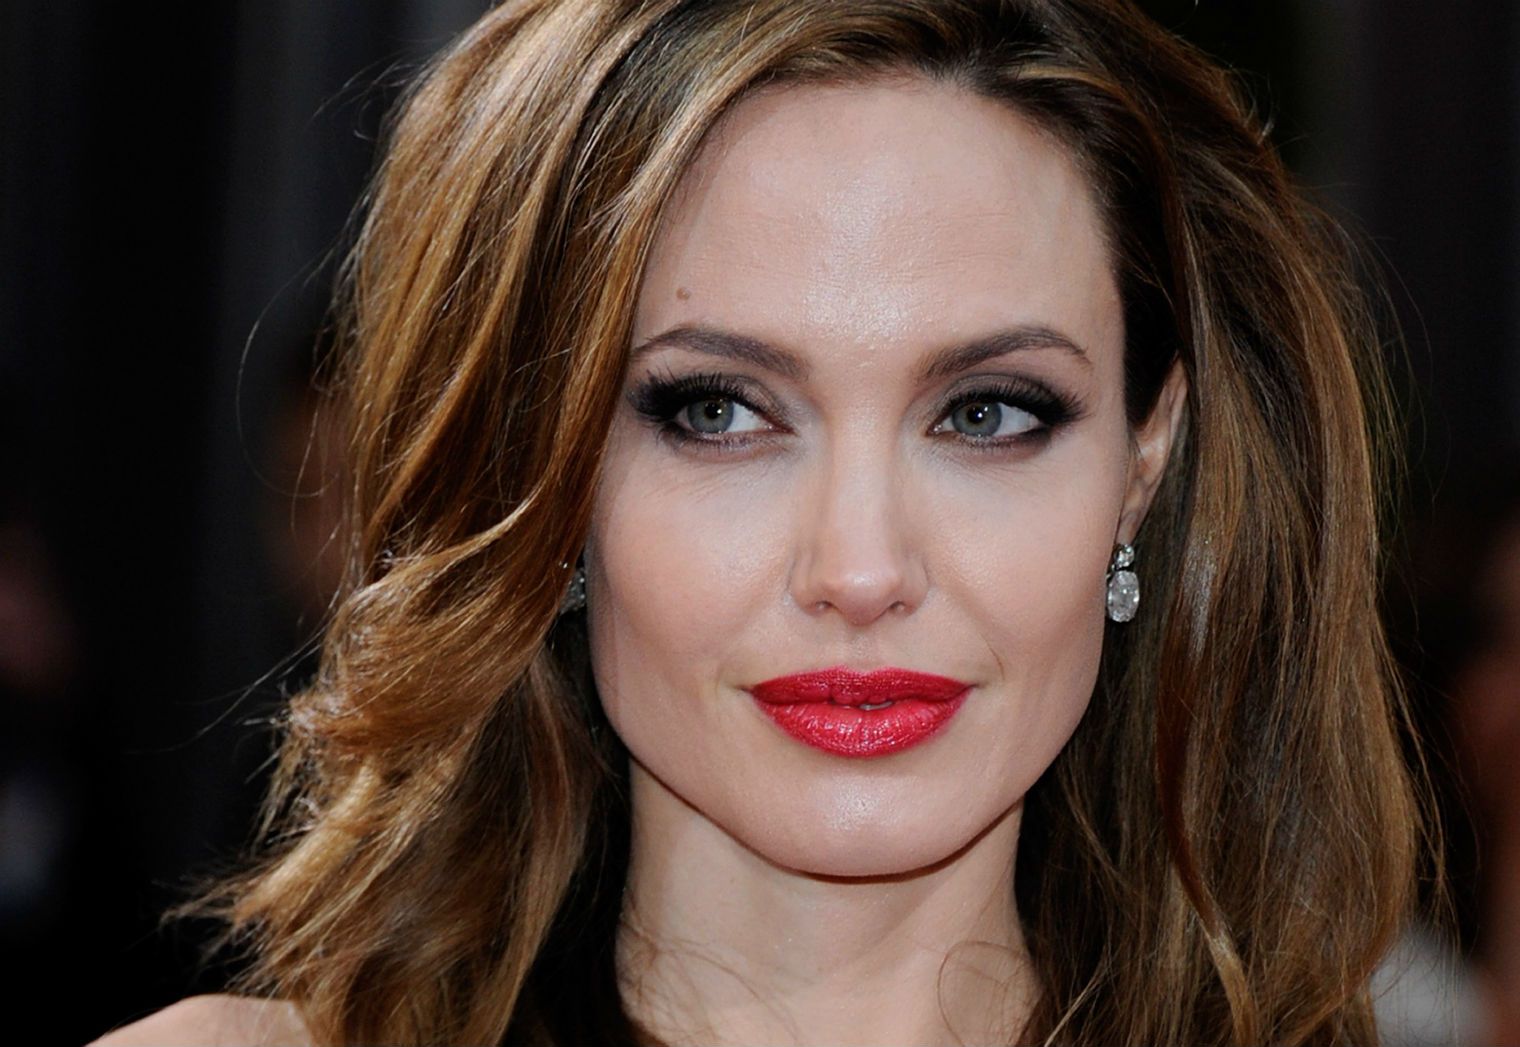 Here’s What Angelina Jolie Has To Say About Trump’s Muslim Ban